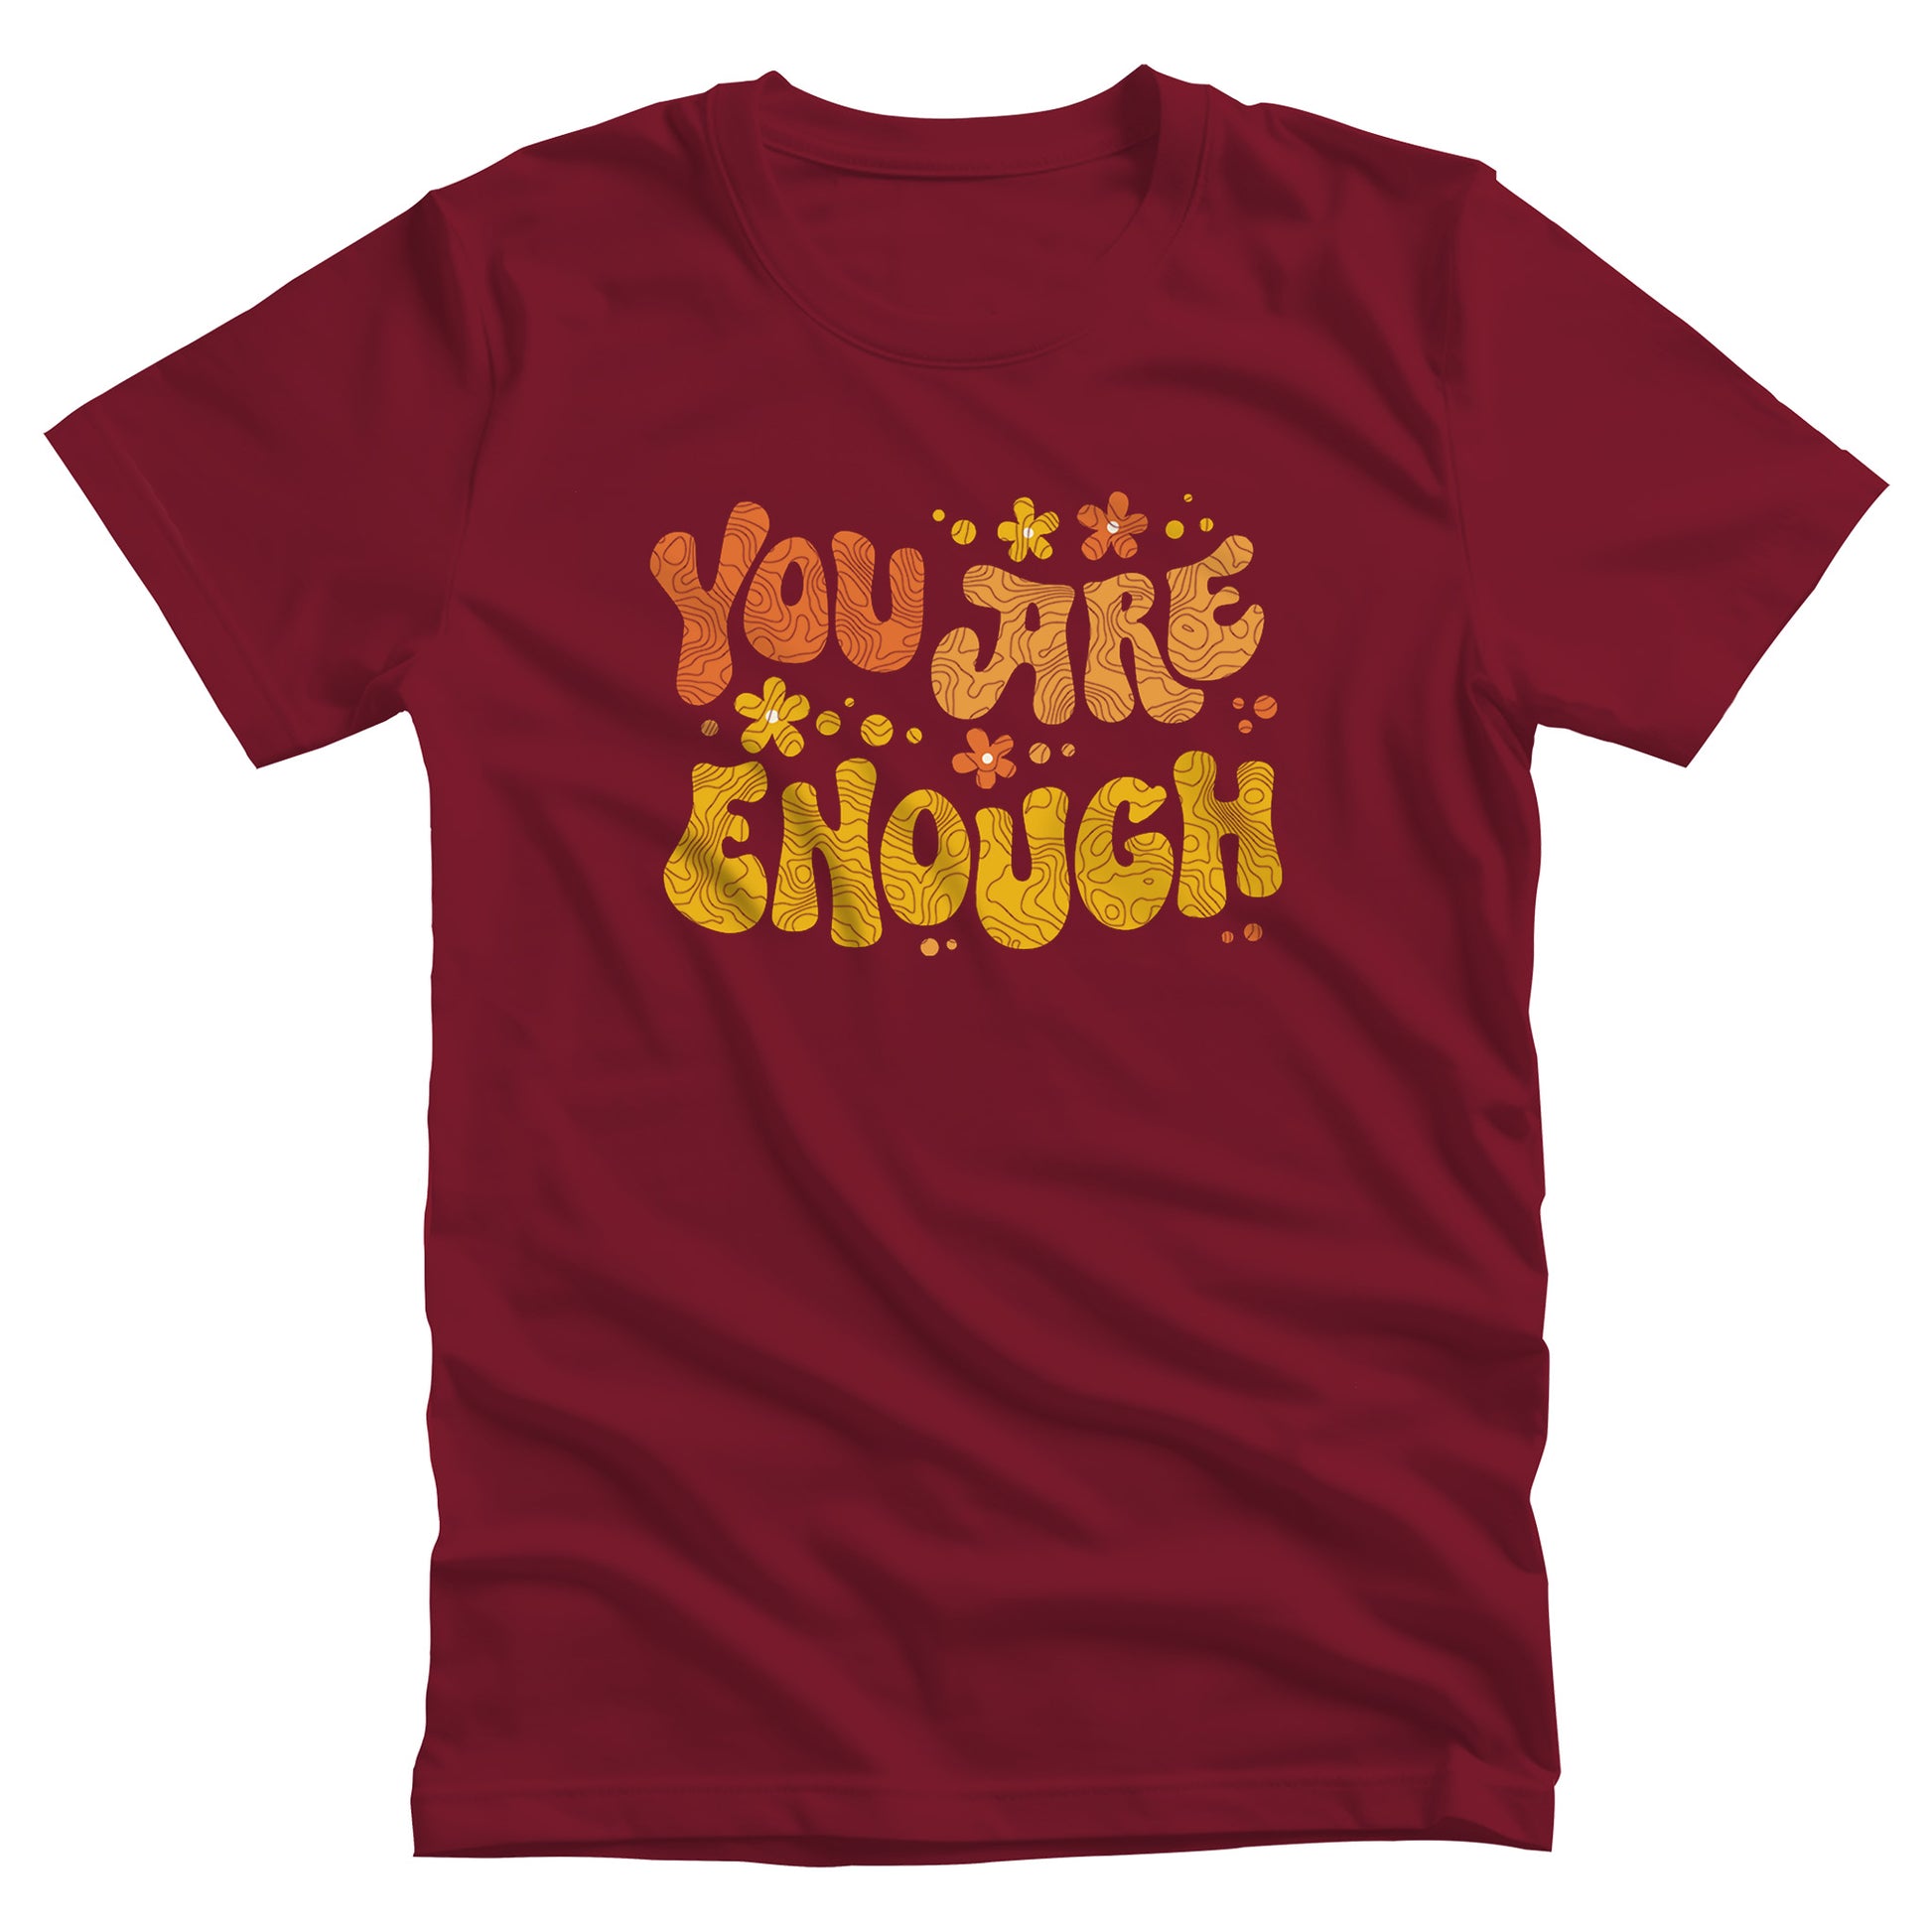 Cardinal color unisex t-shirt with a graphic that says “You Are Enough” in a retro font. There are small retro flowers spaced throughout. “You” is reddish-orange, “Are” is orange, and “Enough” is yellow, all retro as well.